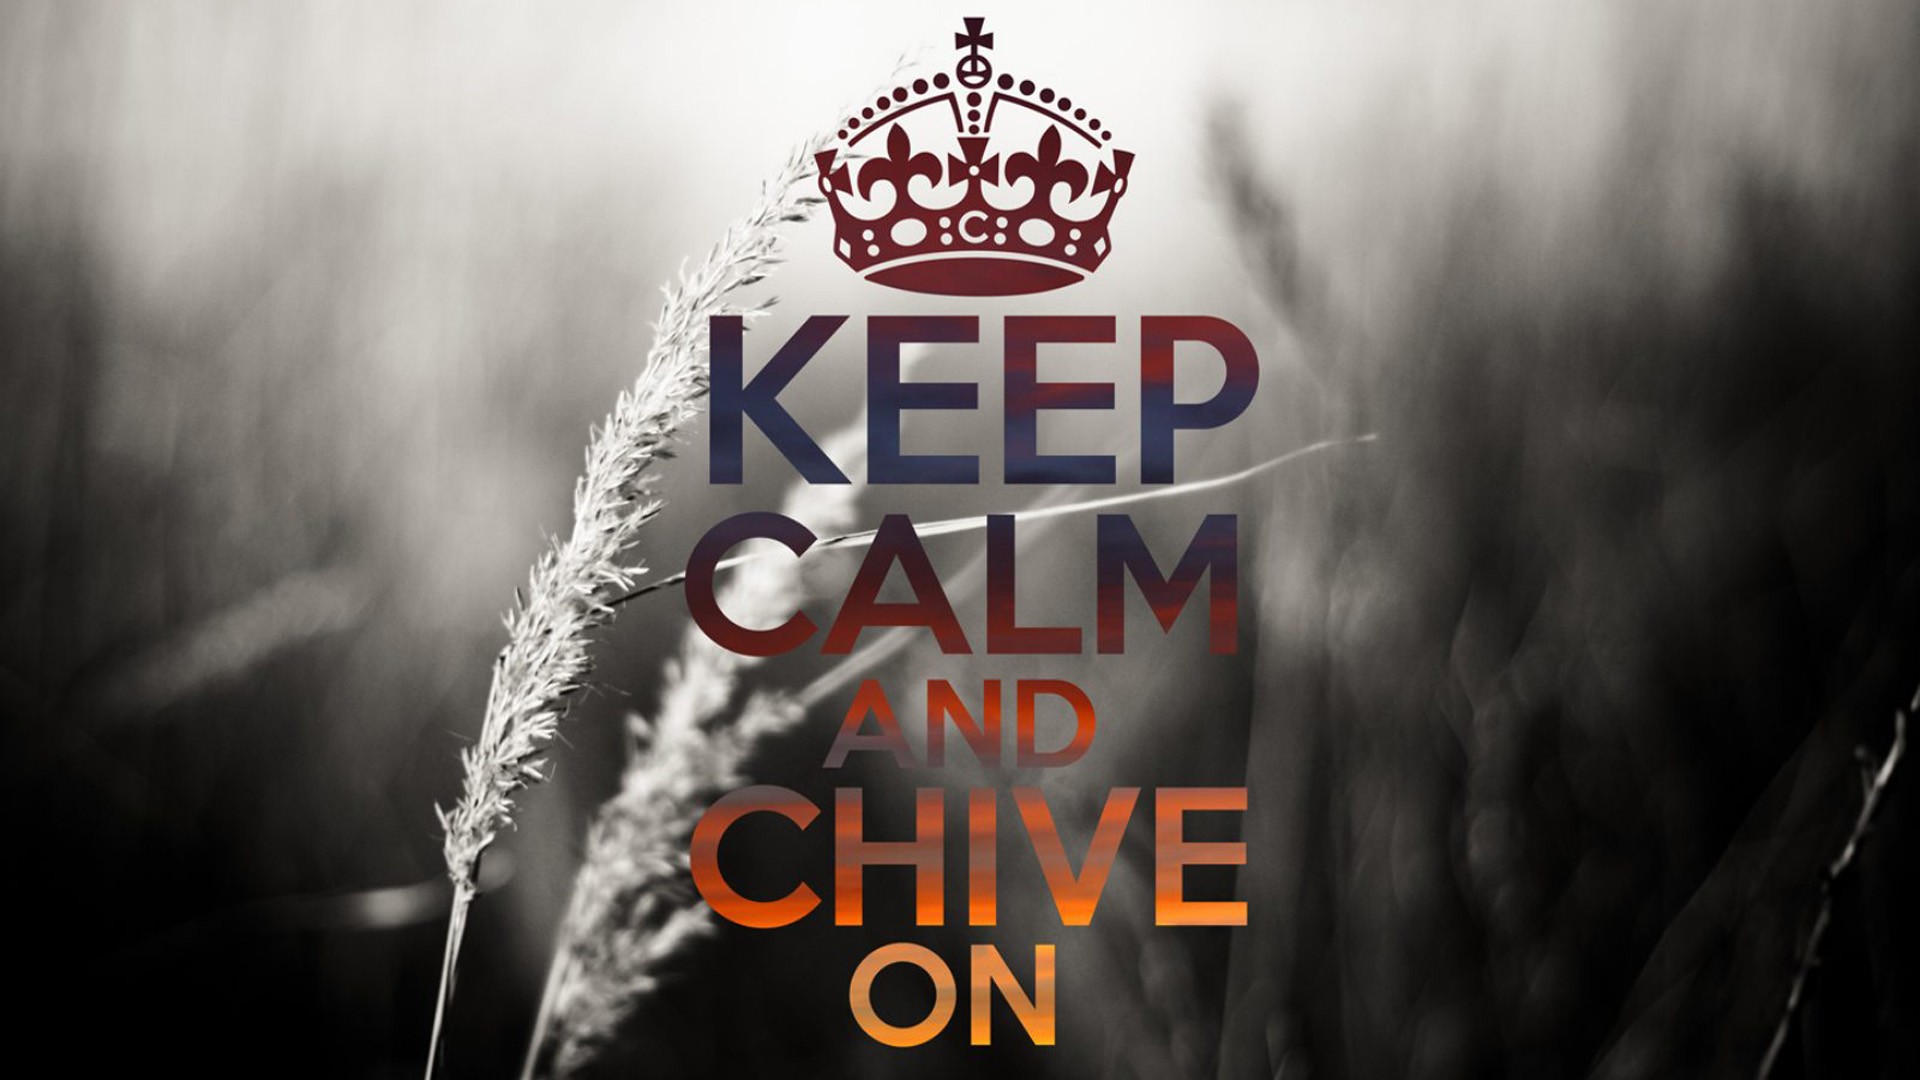 The Chive Logo Wallpaper Black And